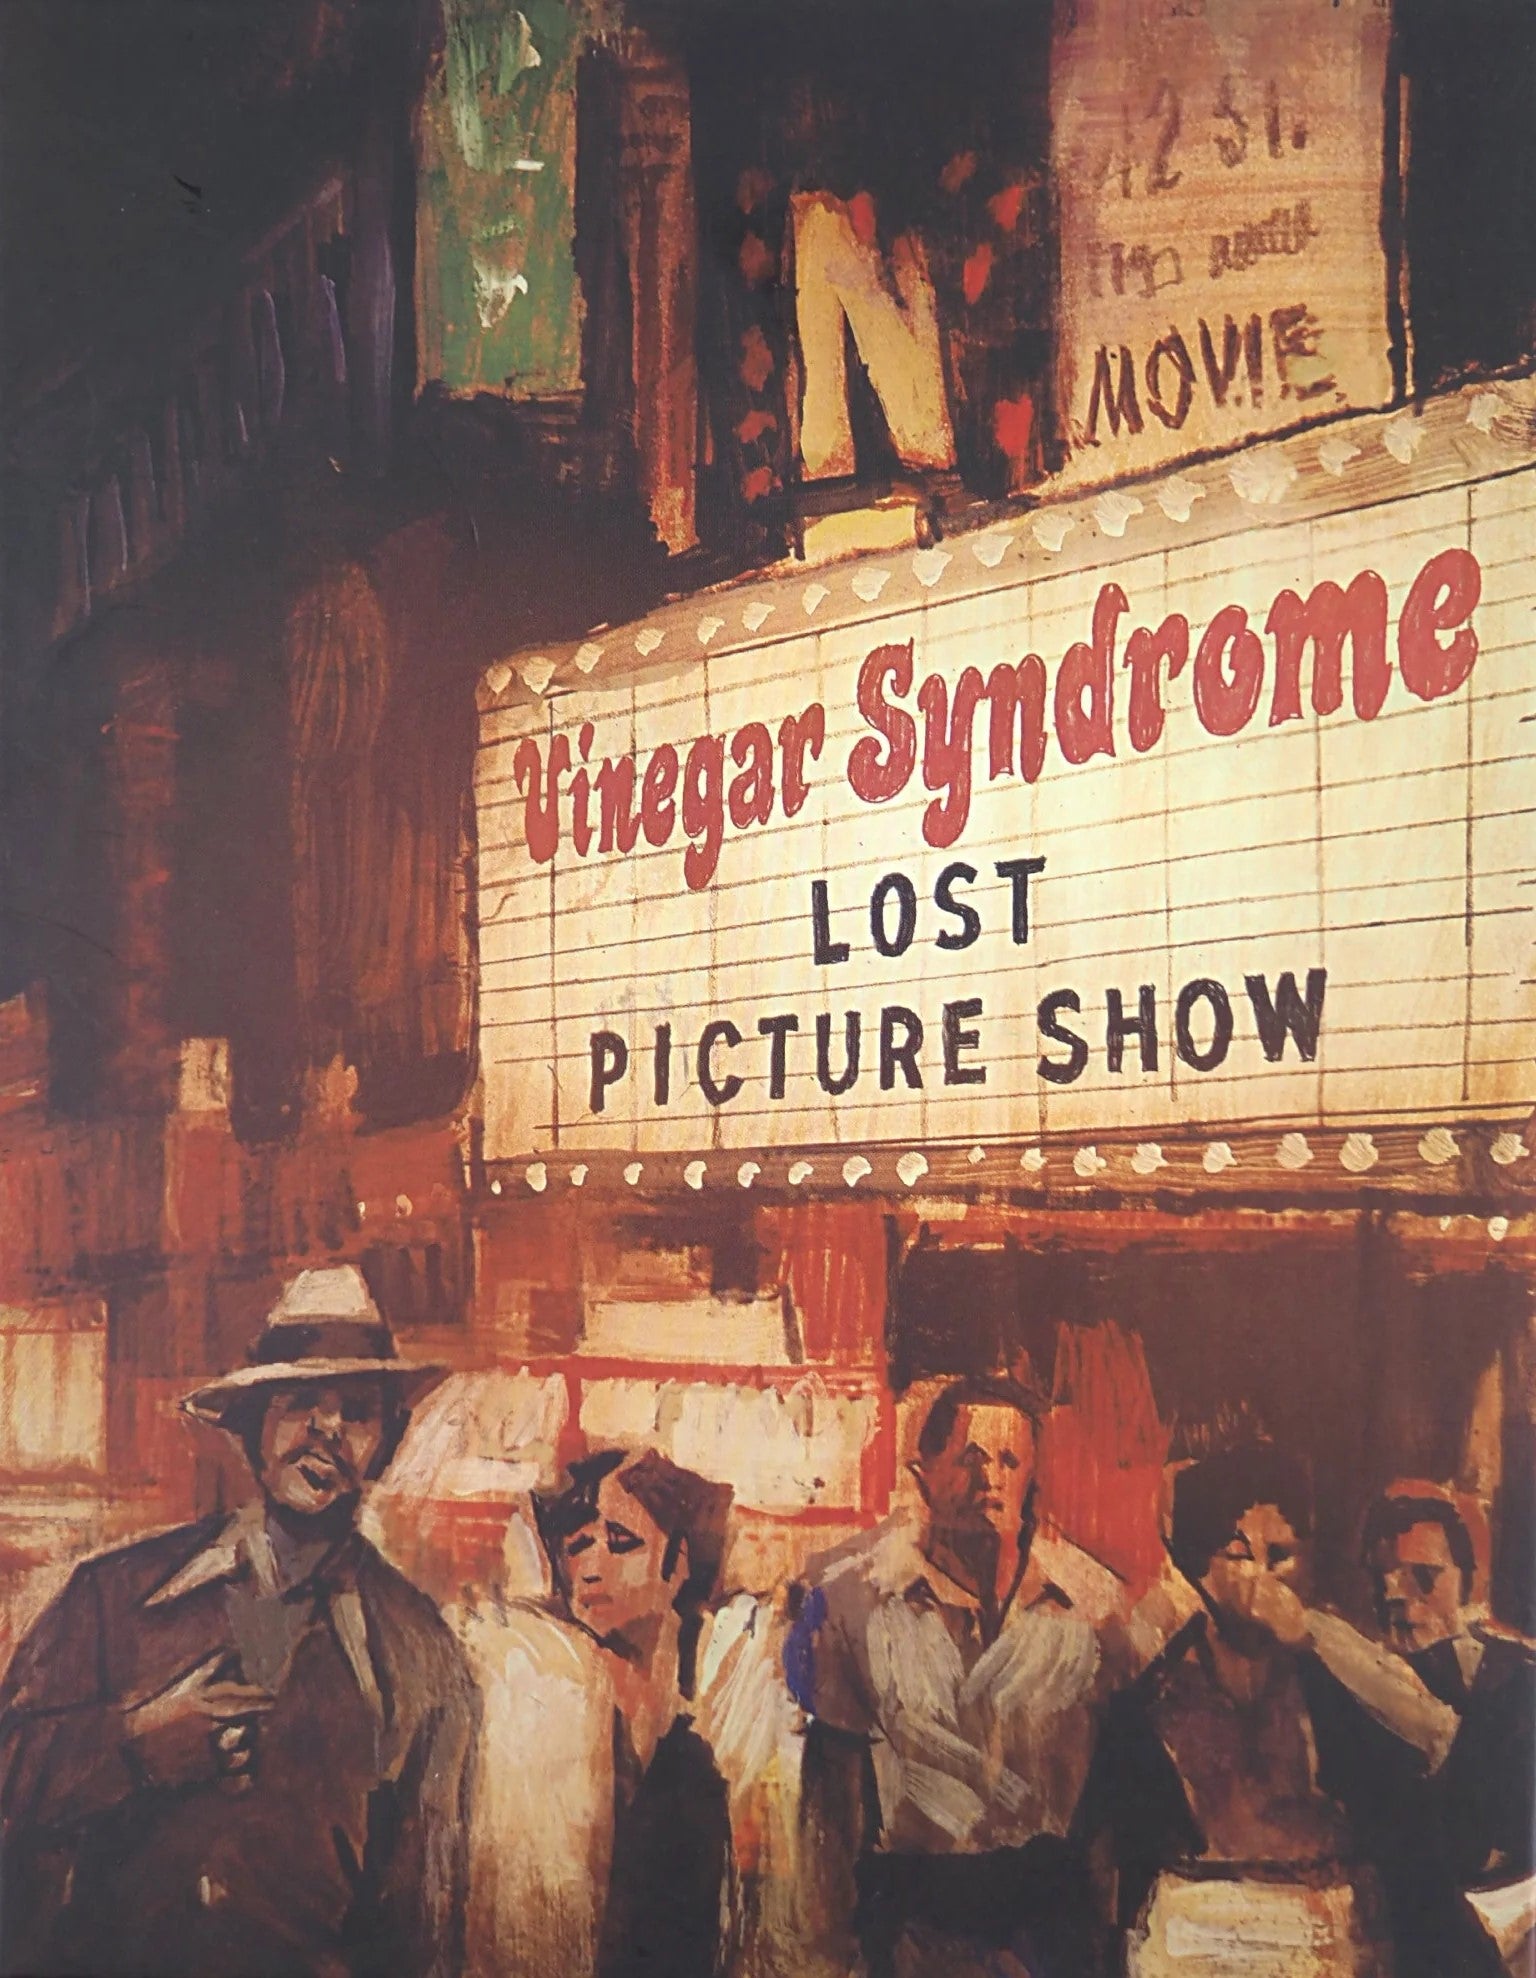 VINEGAR SYNDROME'S LOST PICTURE SHOW (LIMITED EDITION) BLU-RAY